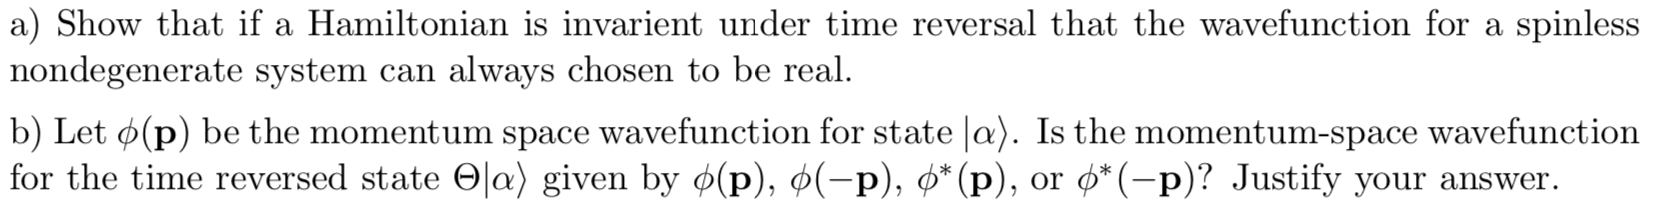 a) Show that if a Hamiltonian is invarient under time reversal that the wavefunction for a spinless
nondegenerate system can always chosen to be real
b) Let (p) be the momentum space wavefunction for state a). Is the momentum-space wavefunction
for the time reversed state Oa) given by ¢(p), ø(-p), p* (p), or o*(-p)? Justify your answer
